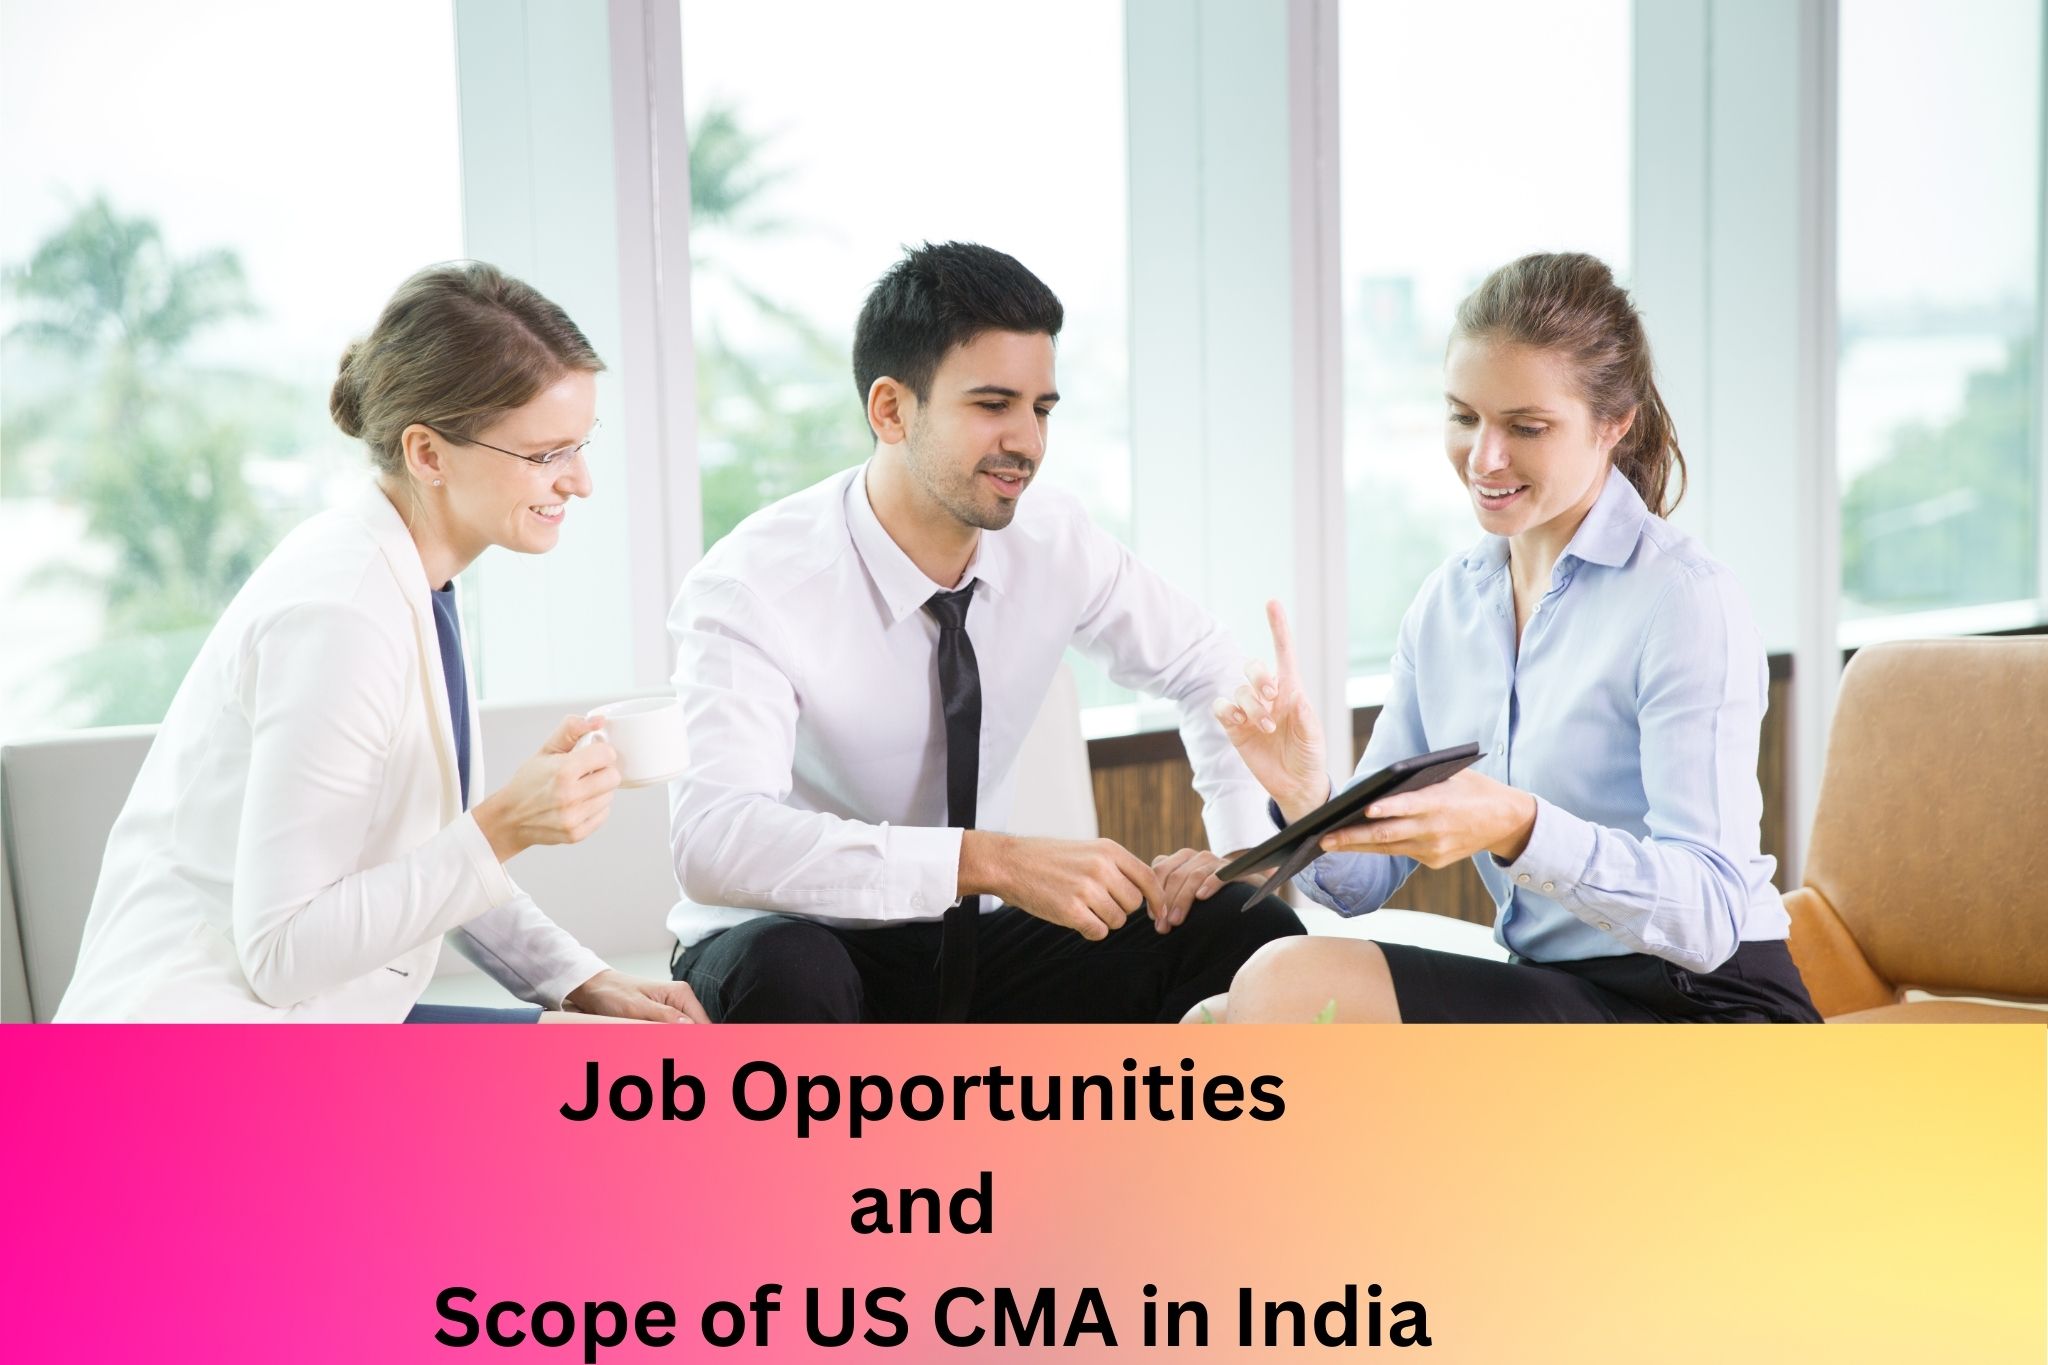 Job Opportunities and Scope of US CMA in India - VGLD